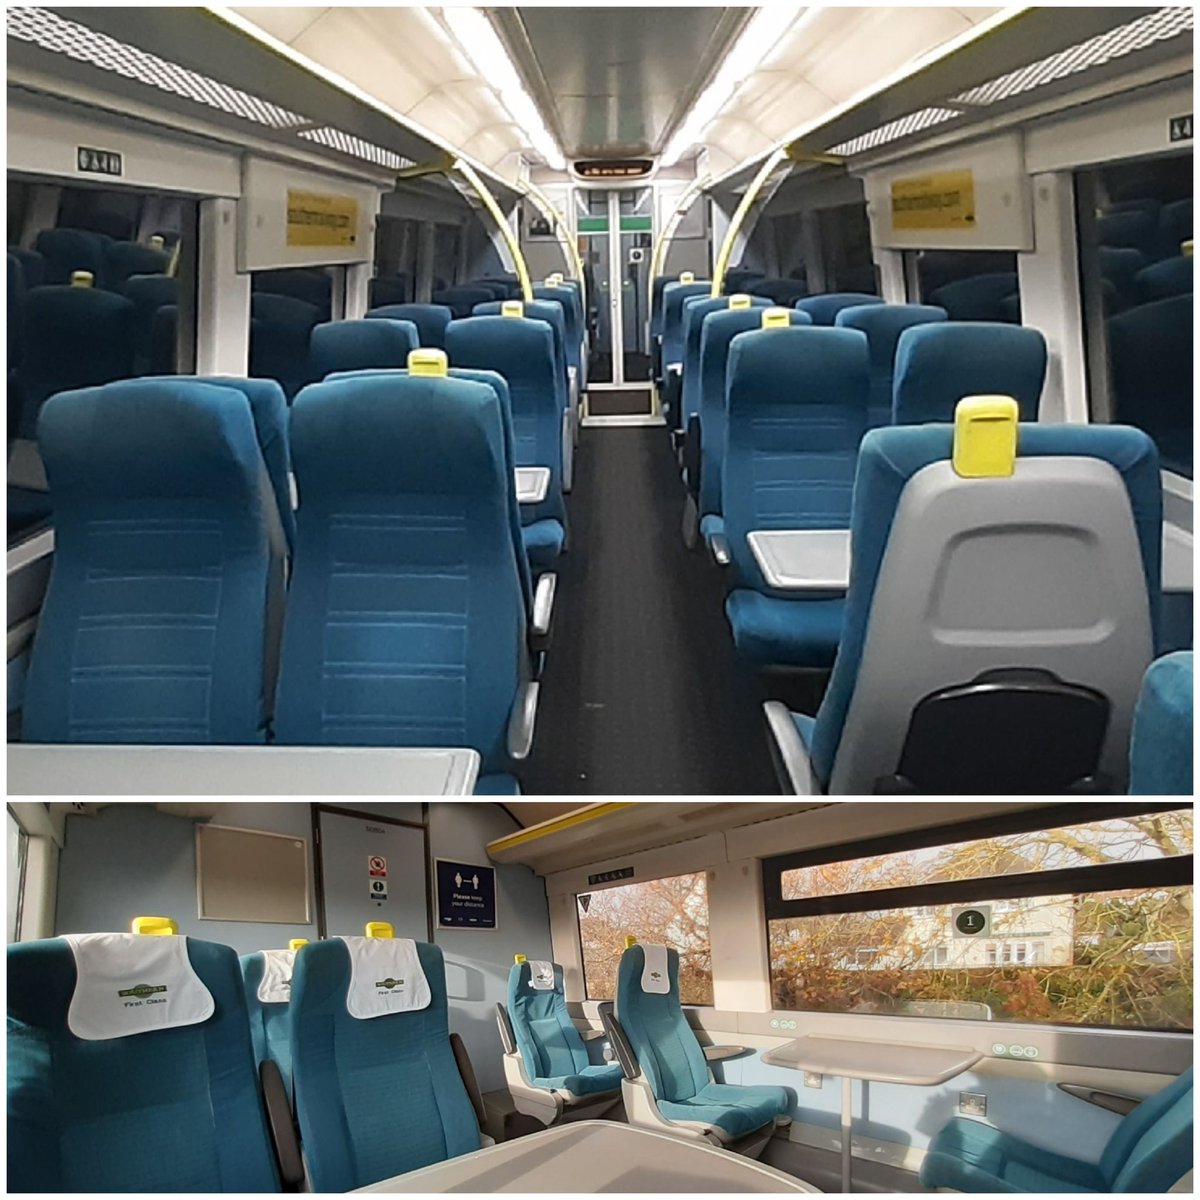 Class 171s have standard and 1st class seating. 1st is located behind driving cabs and is declassified on Marshlink services 》 2 Car 171/2s and /7s have 107 Std seats and 9 1st seats》4 Car 171/4s and/8s have 241 Std seats and 18 1st seats